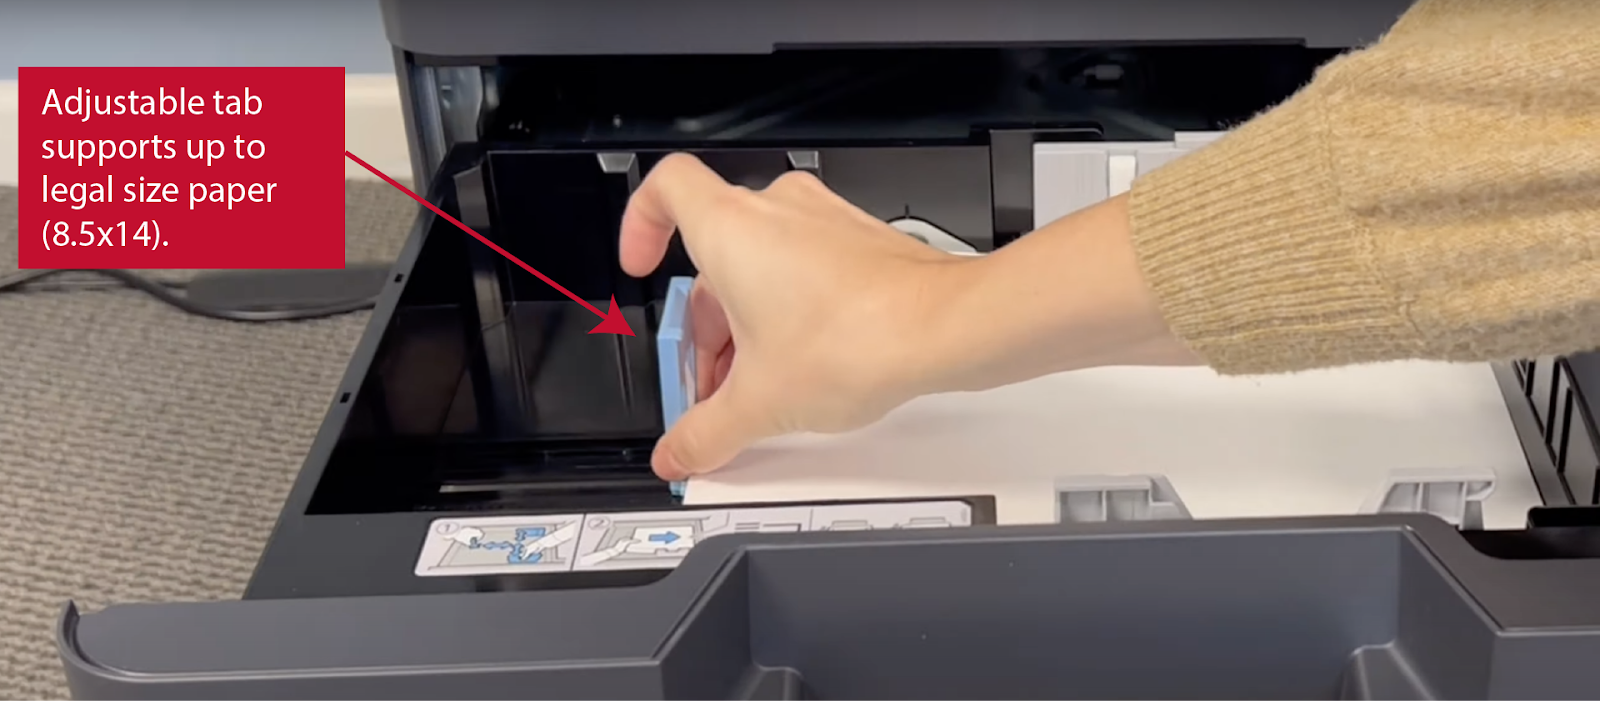 Kyocera 308ci Adjustable tab supports up to legal size paper